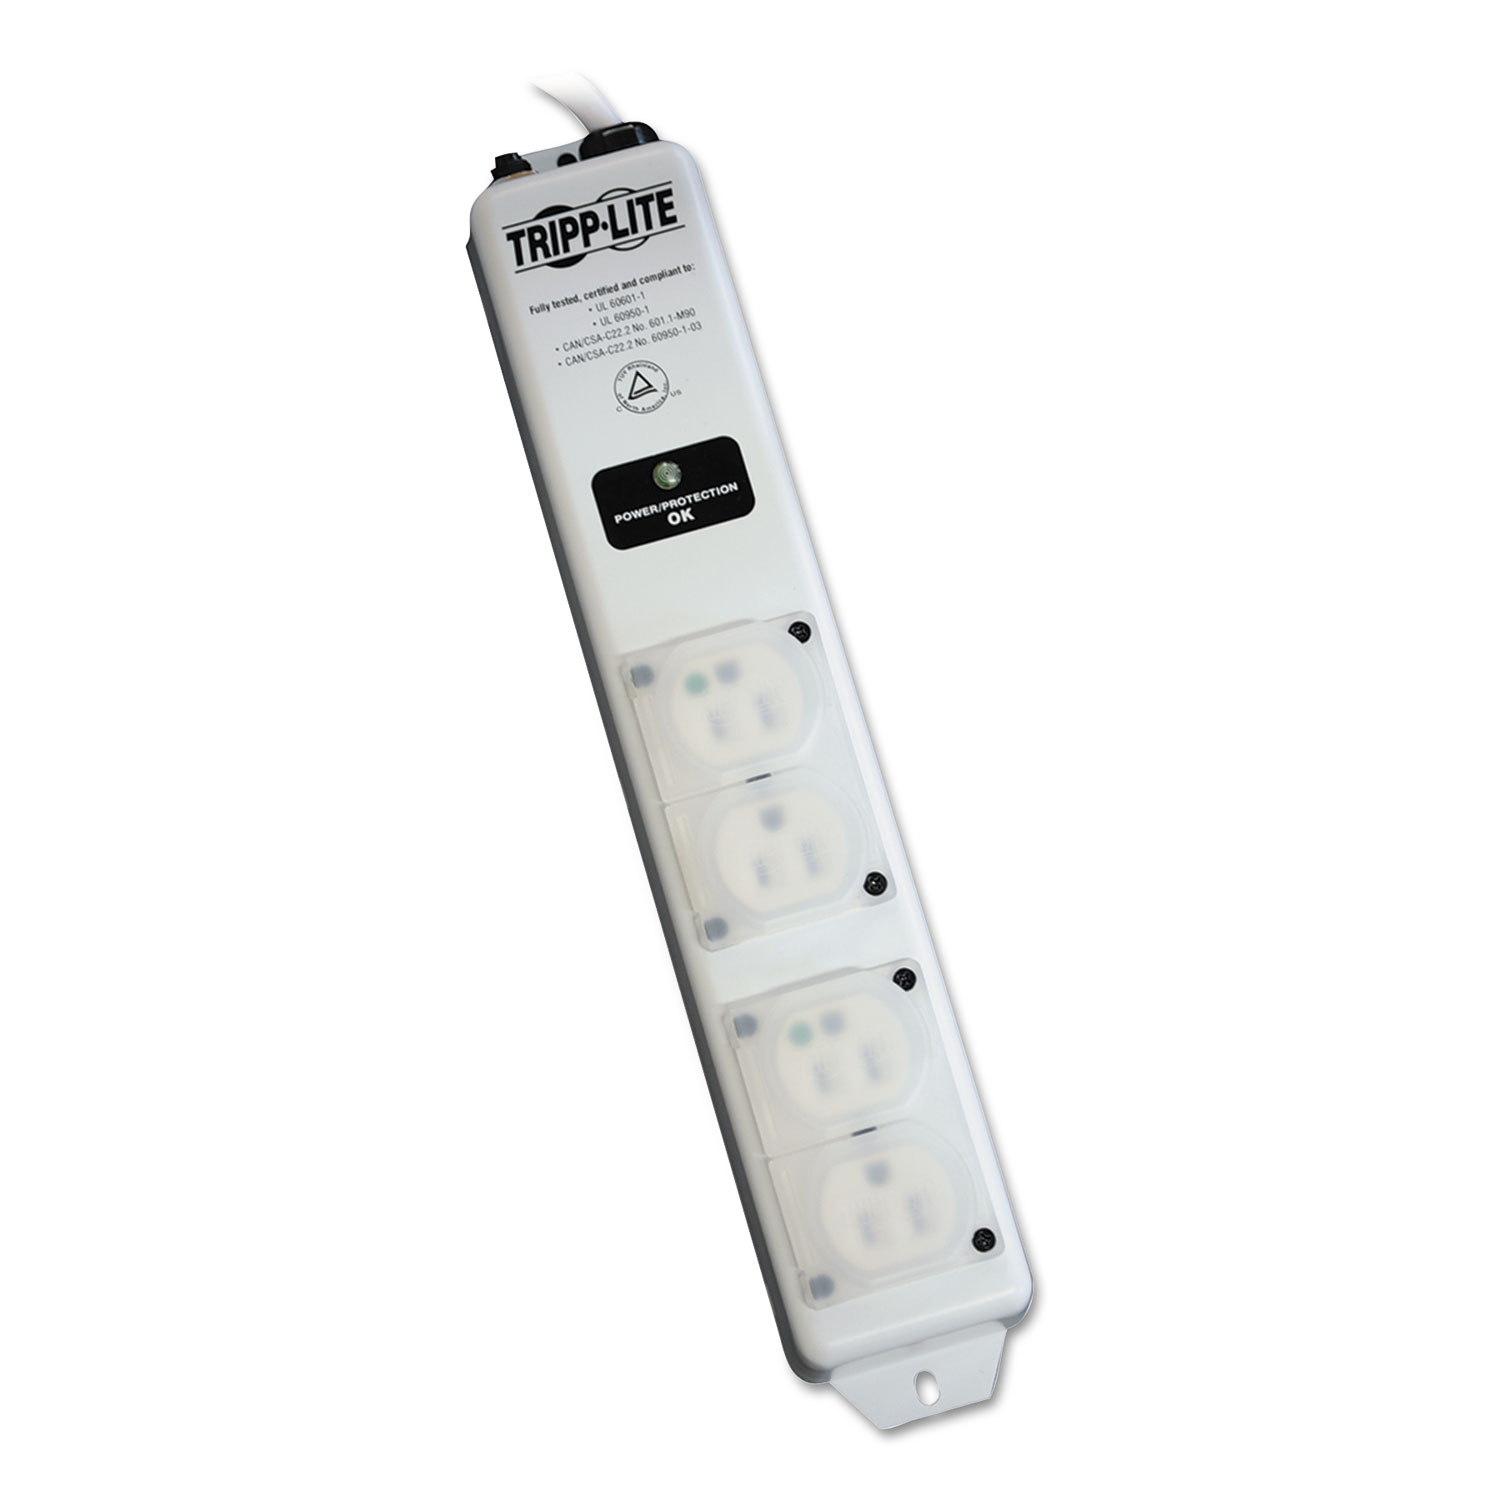  Tripp Lite SPS406HGULTRA Medical-Grade Power Strip with Surge Protection, 4 Outlets, 6 ft. Cord, 1410 J (TRPSPS406HGULTR) 